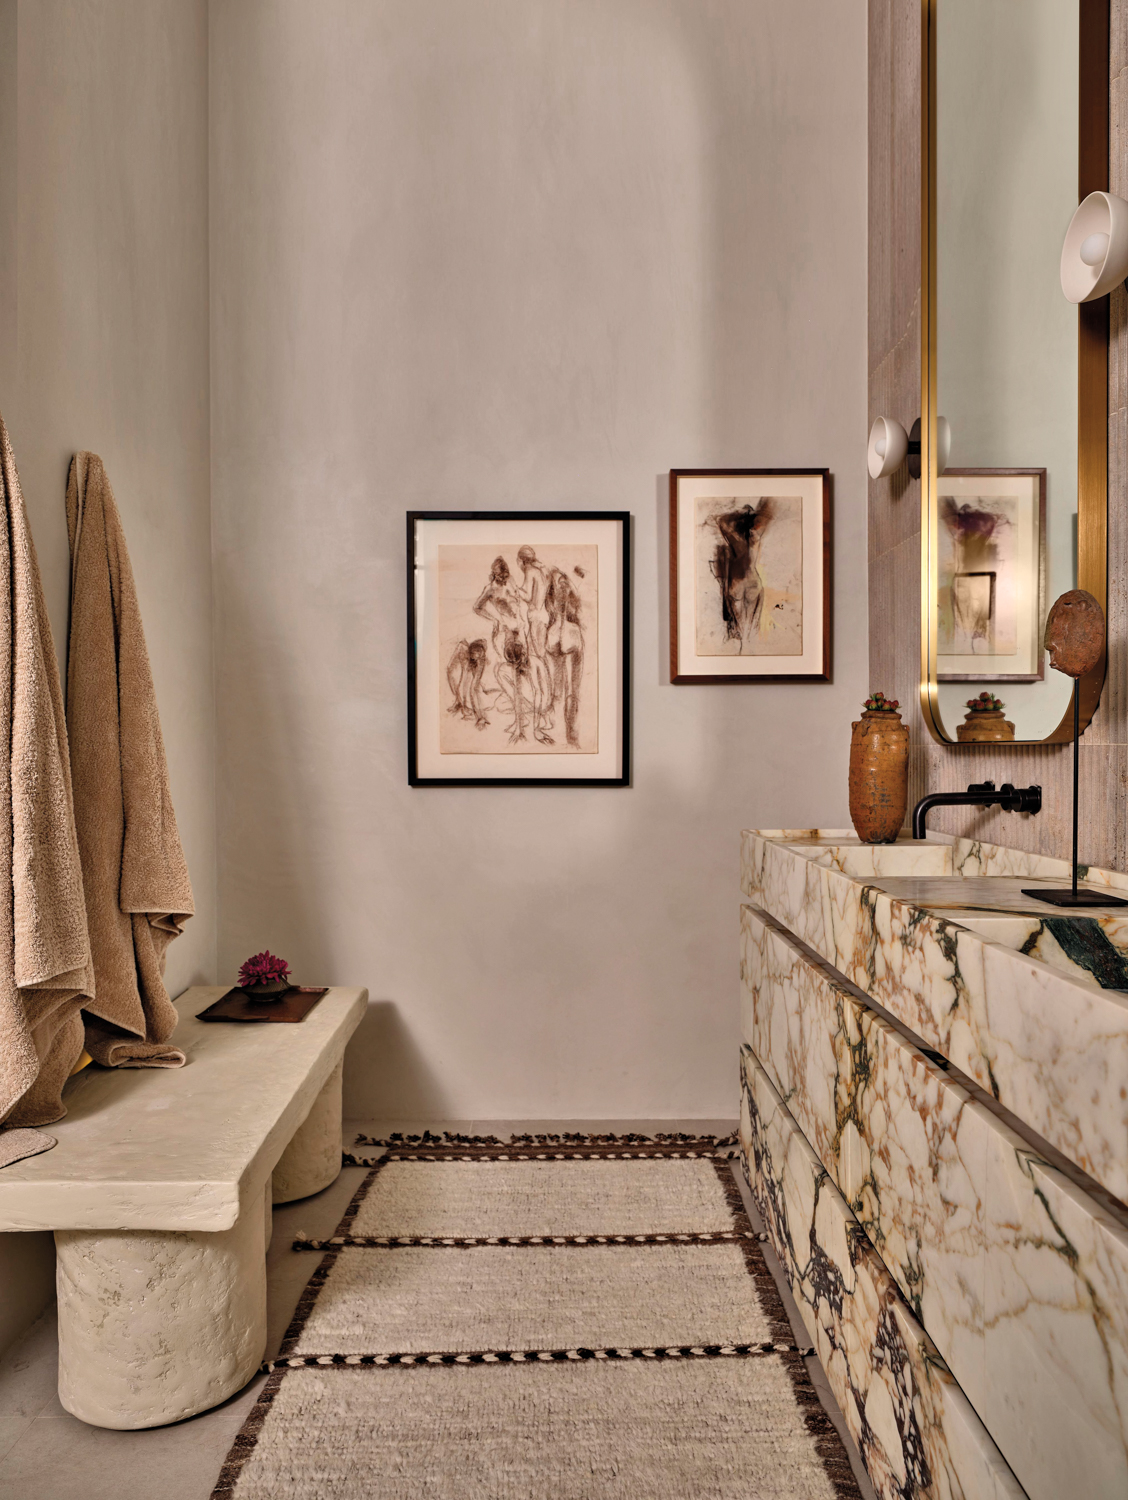 bathroom with plaster bench, Morrocan runner and vintage artwork